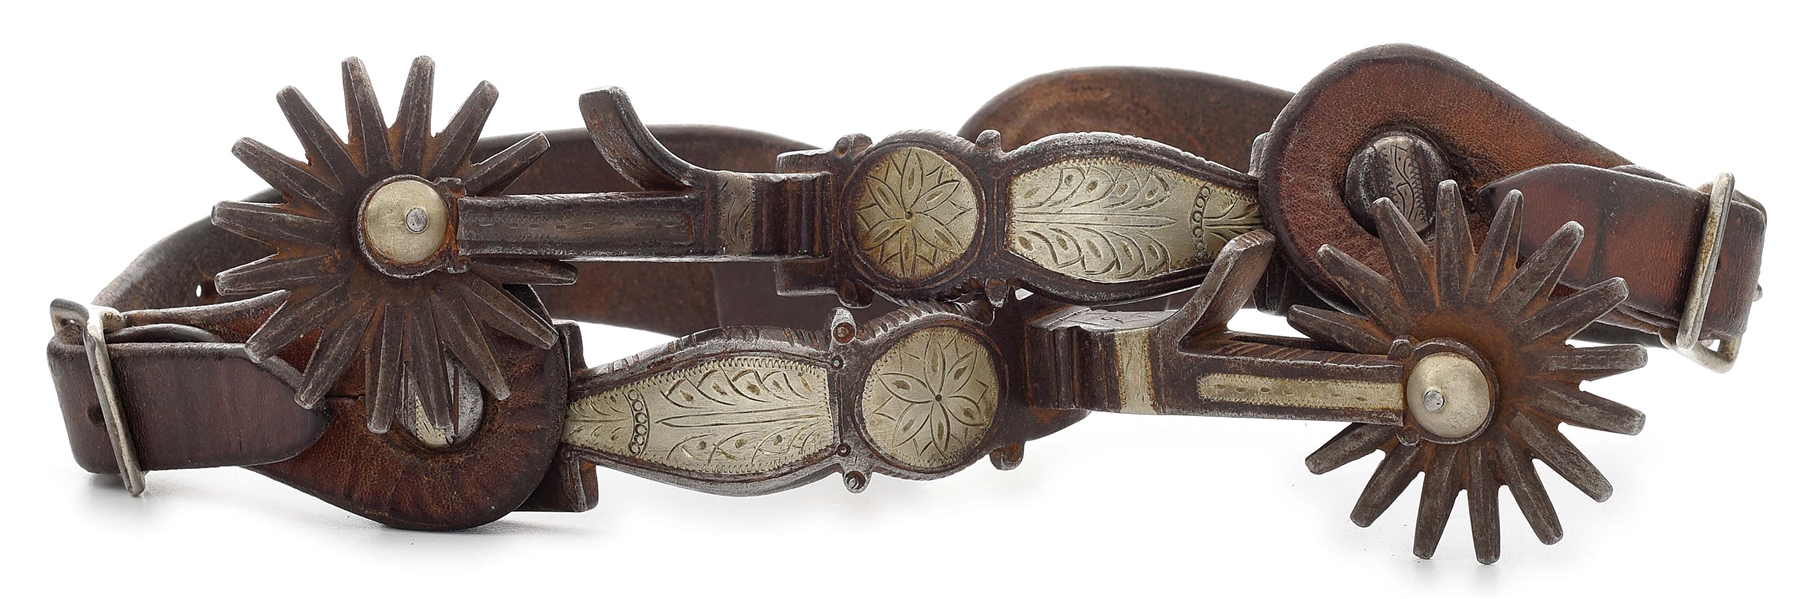 UNMARKED INLAID SPURS